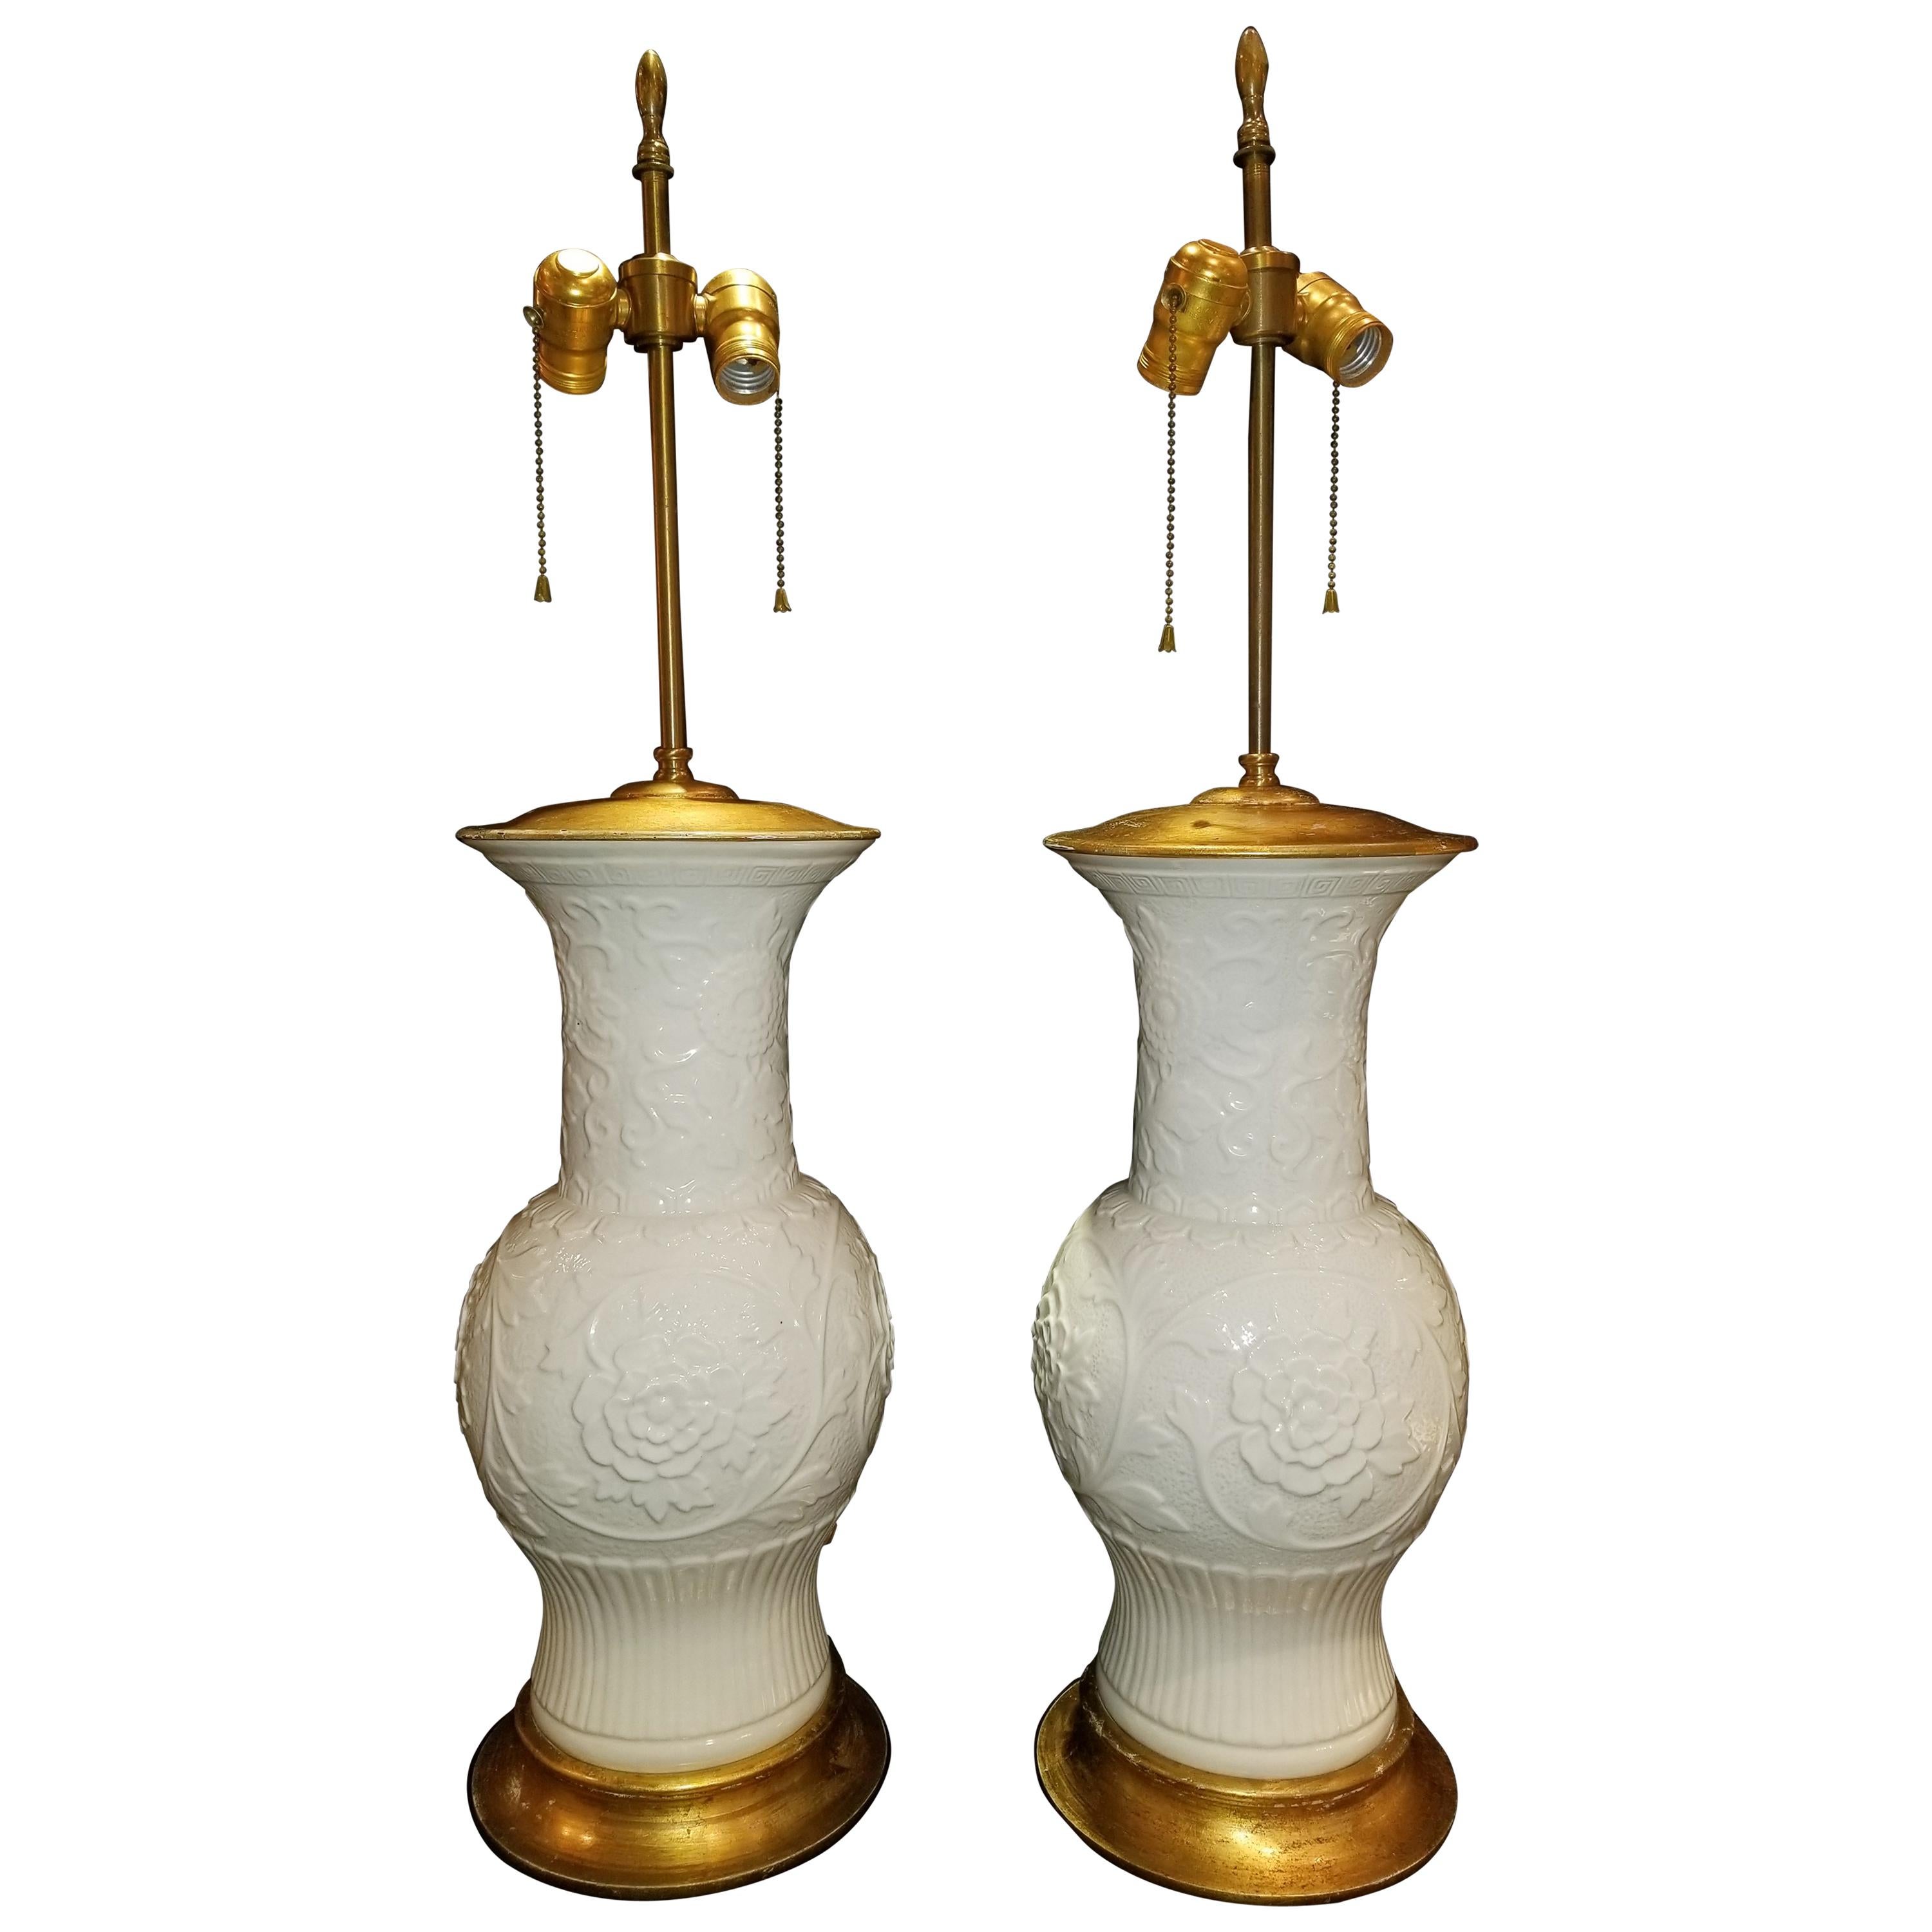 Pair of Antique Chinese Blanc de Chine Vases mounted as Lamps